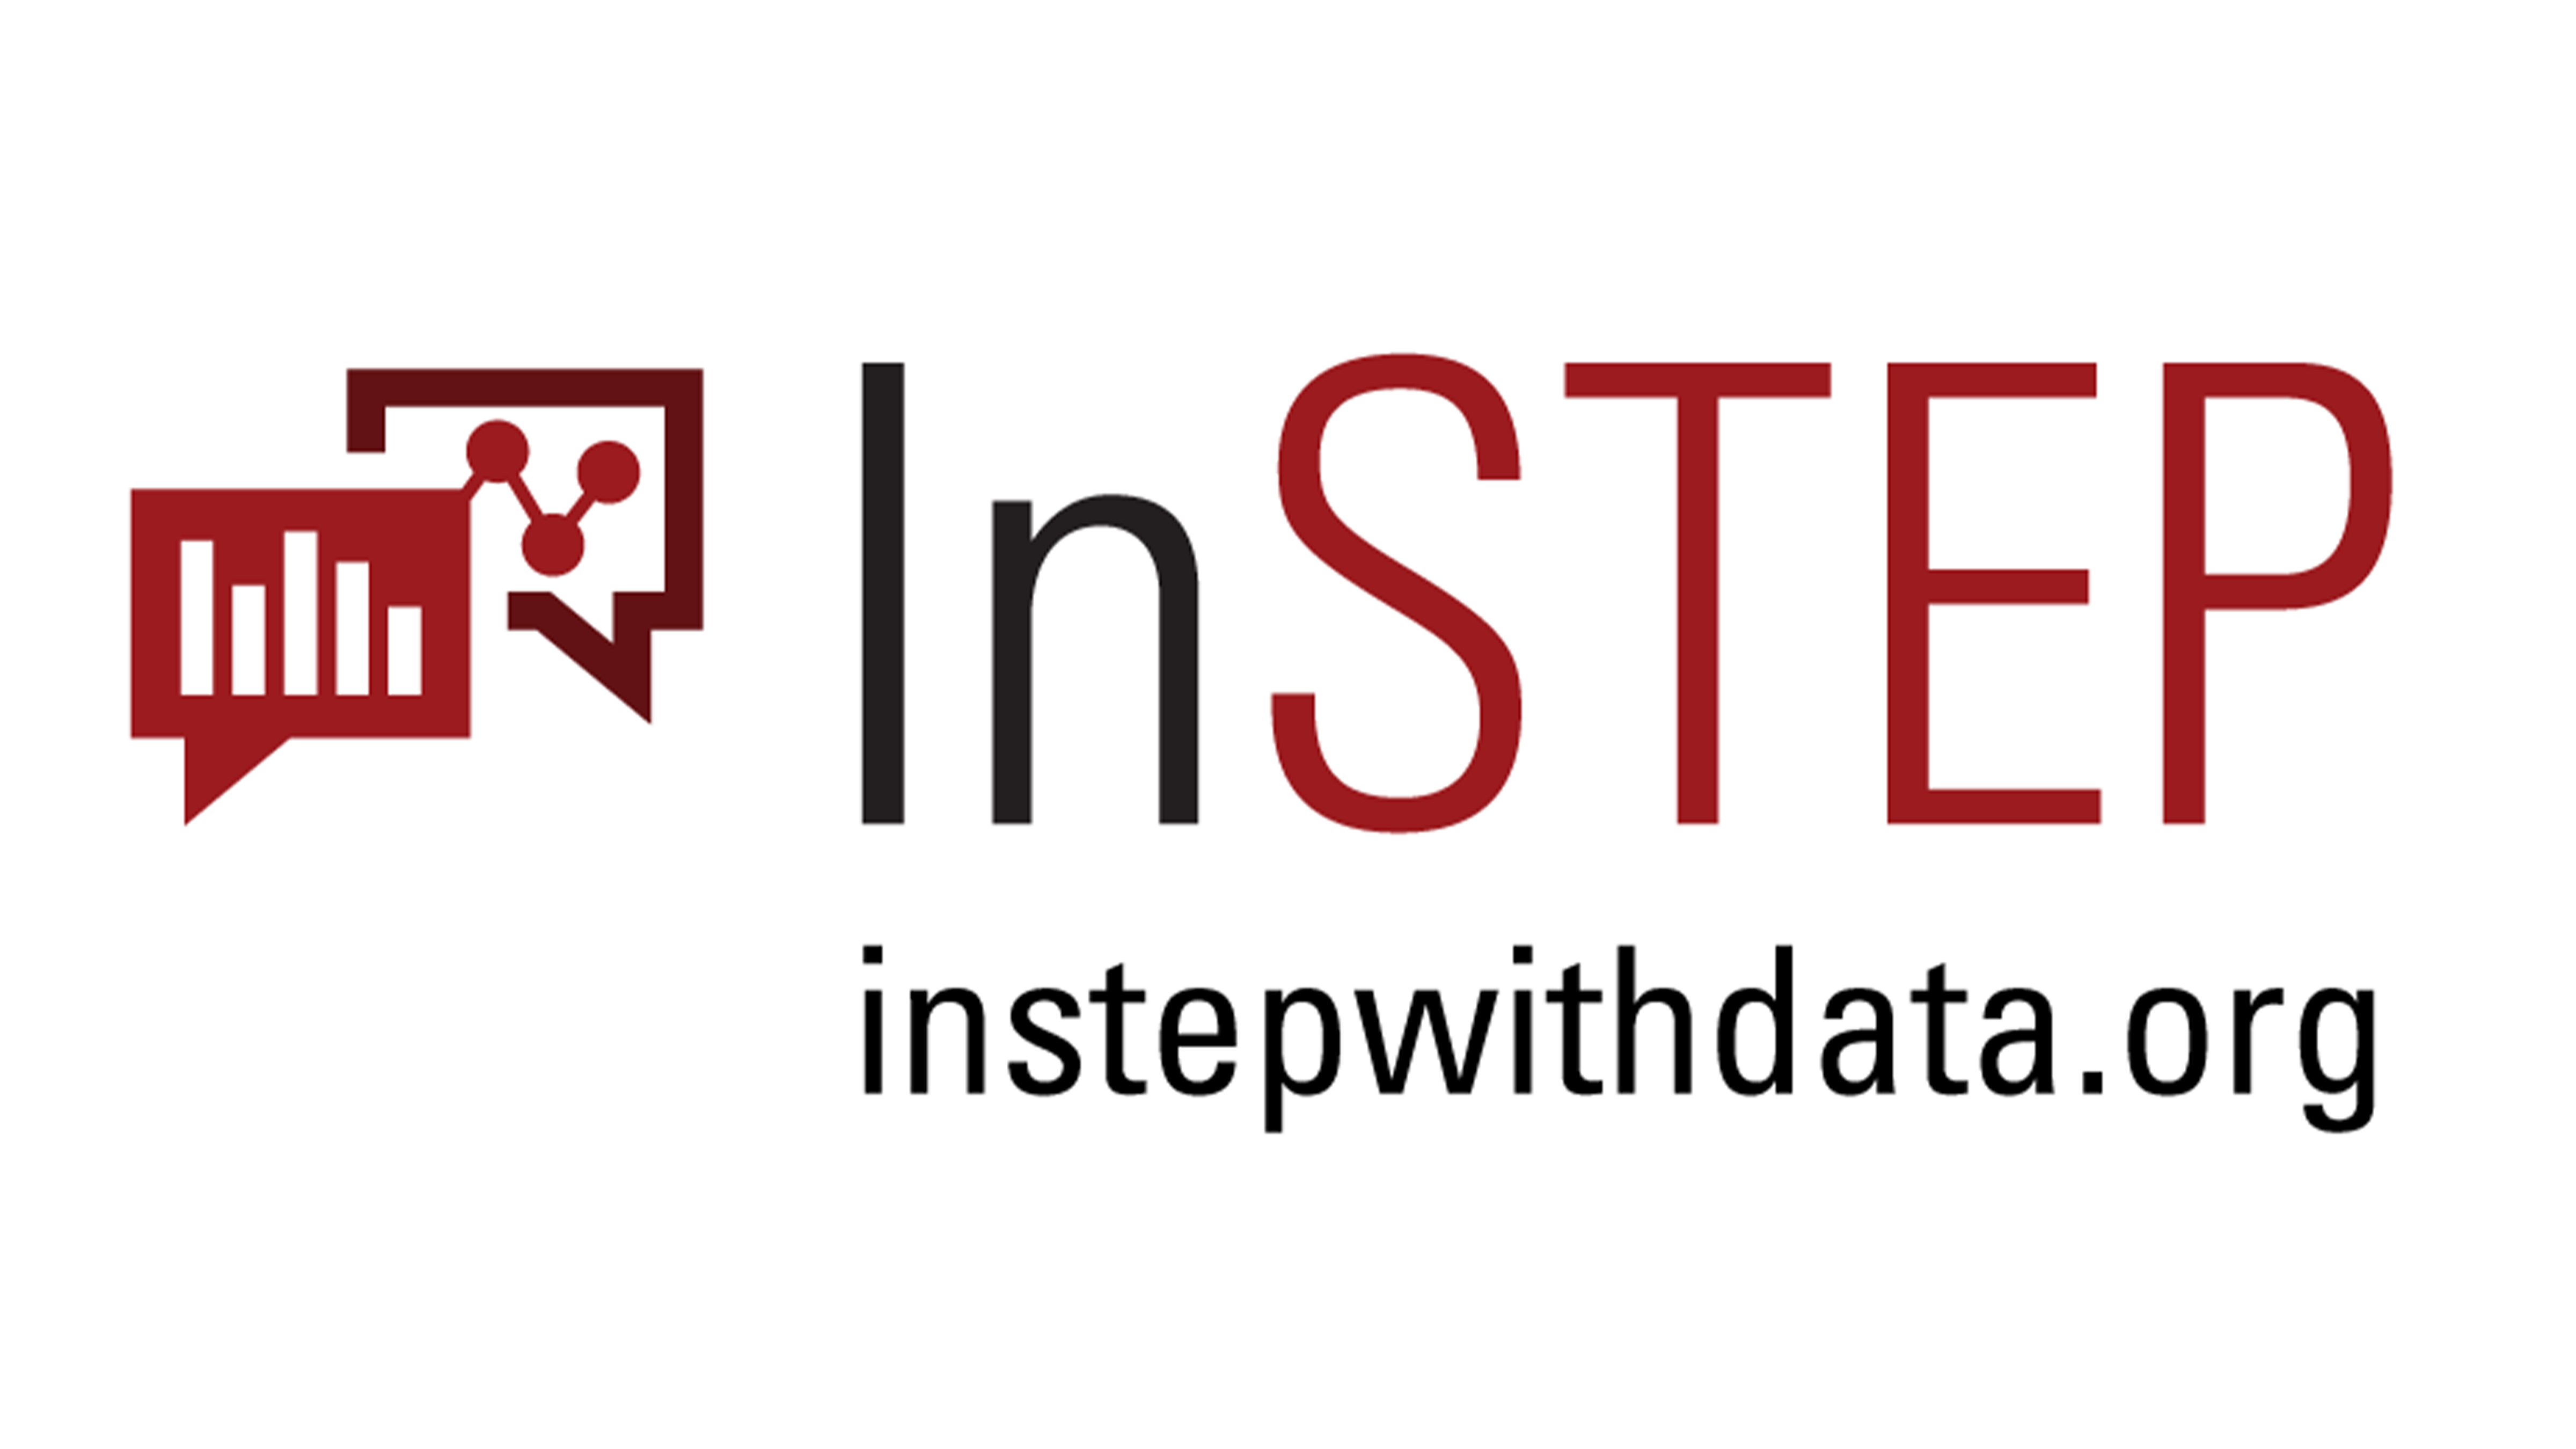 InSTEP with data dot org
